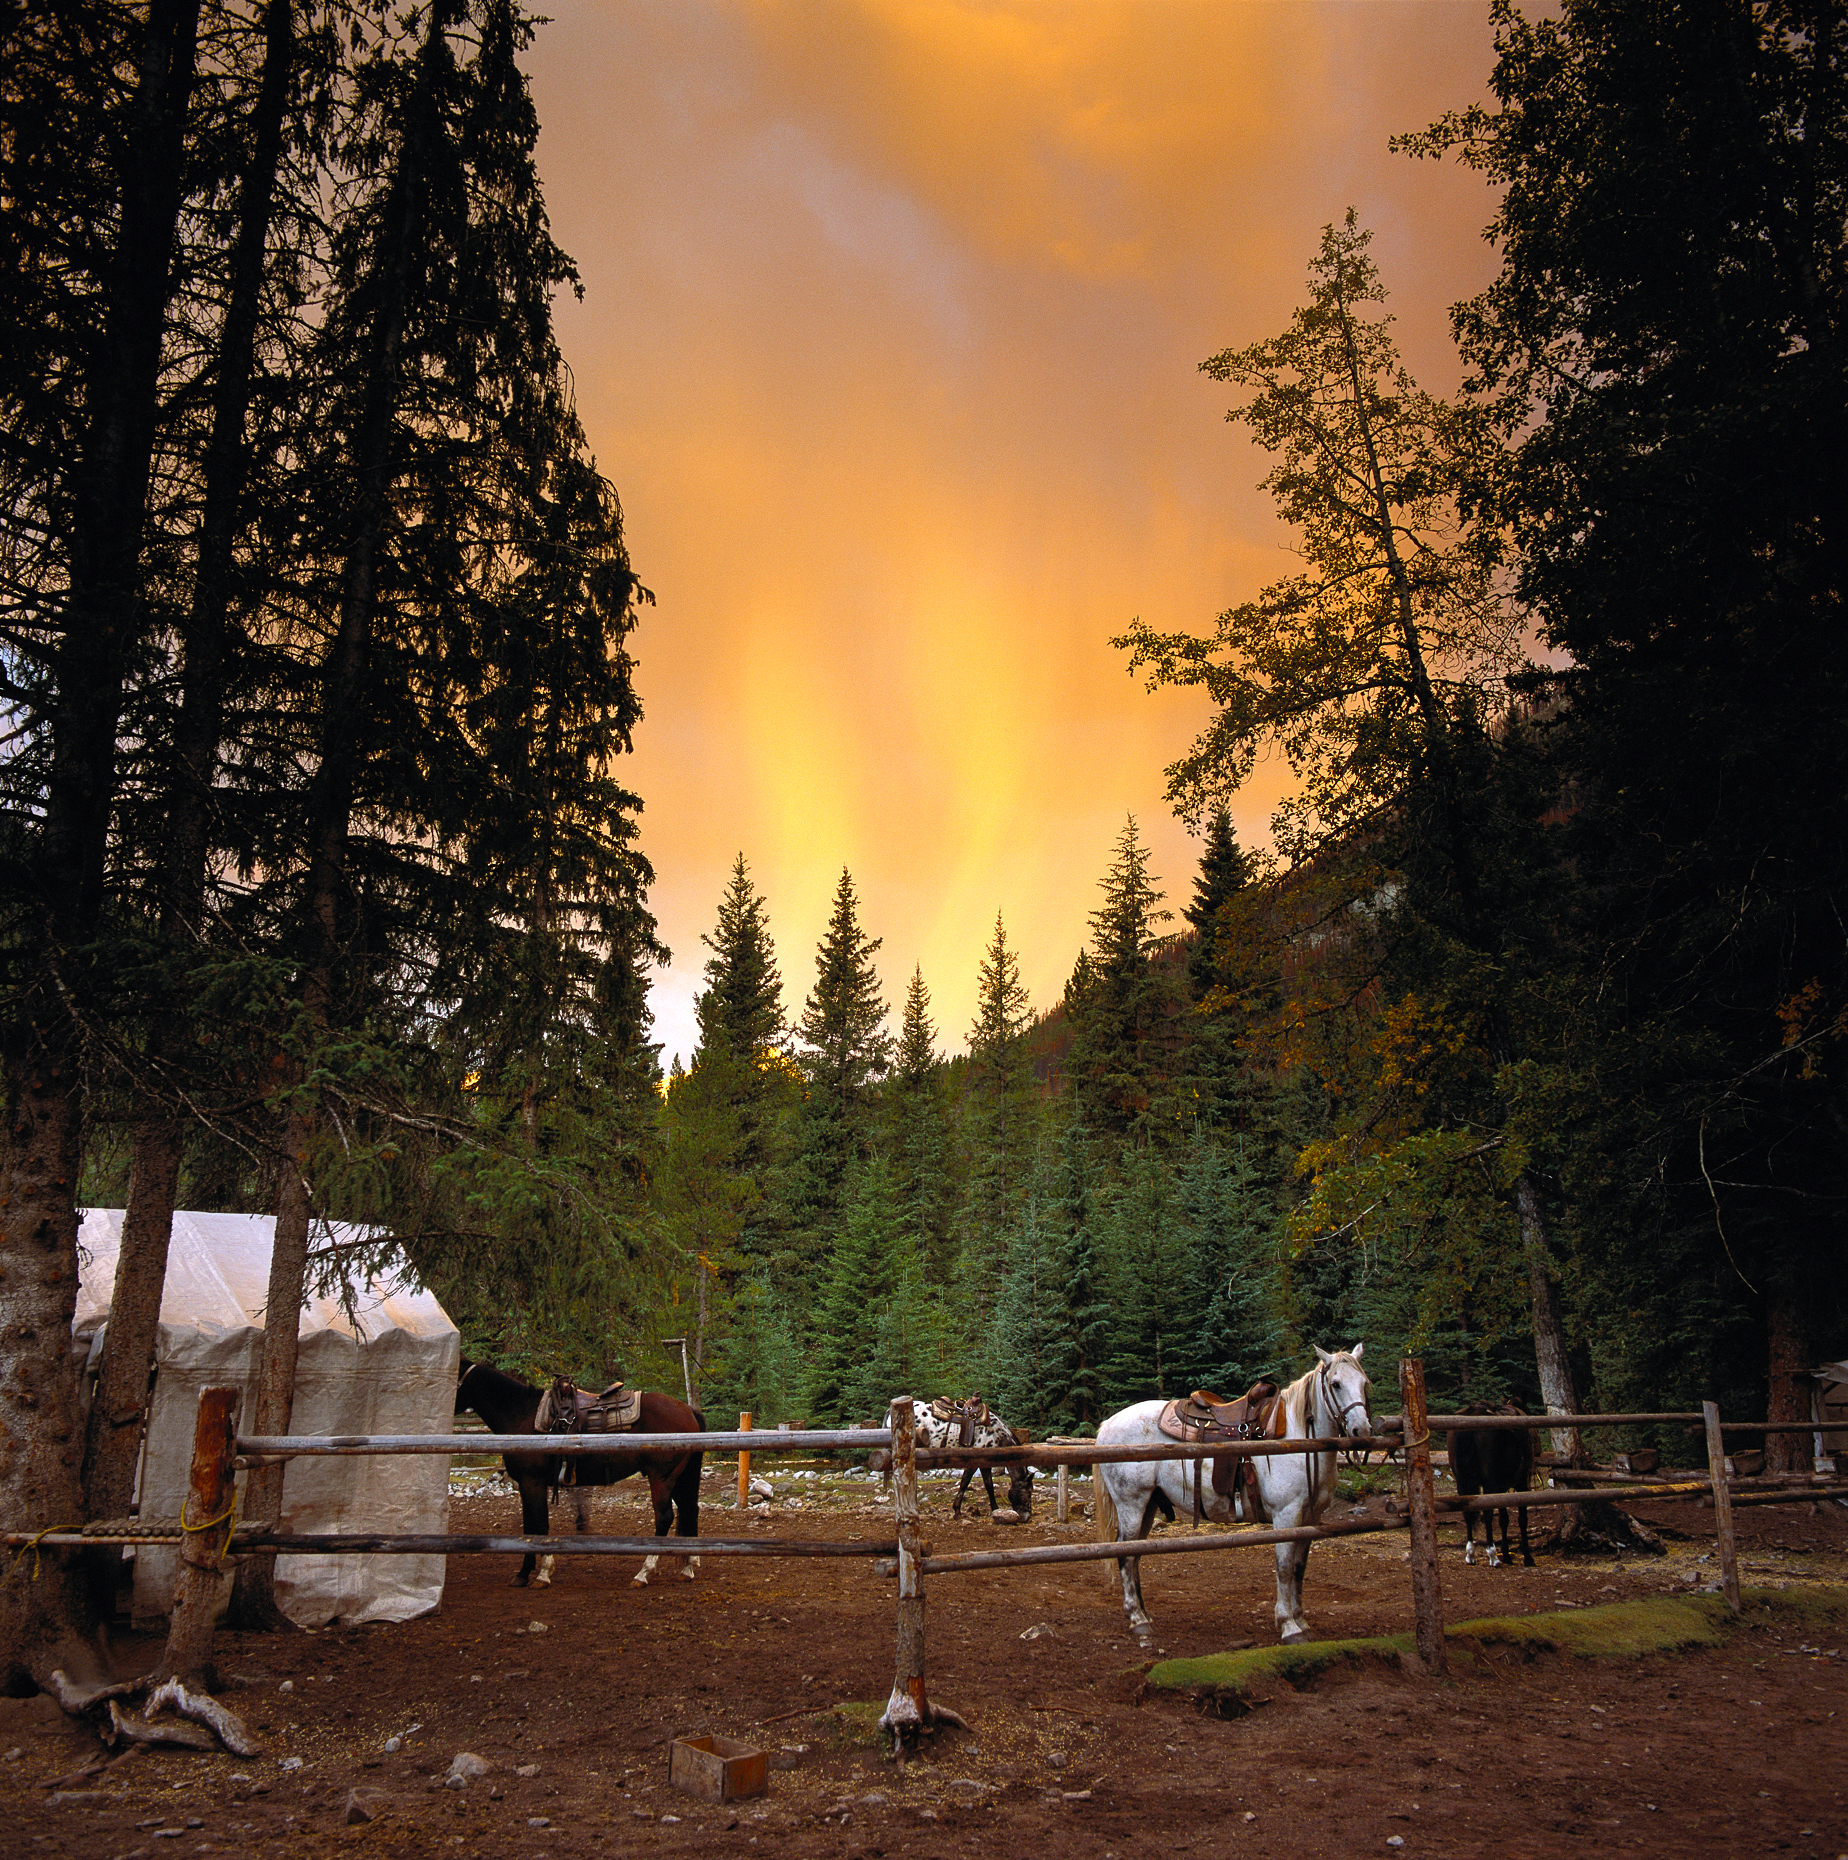 A forest fire paints the sunrise sky pink, horse corral, Banff National Park, Alberta, Canada